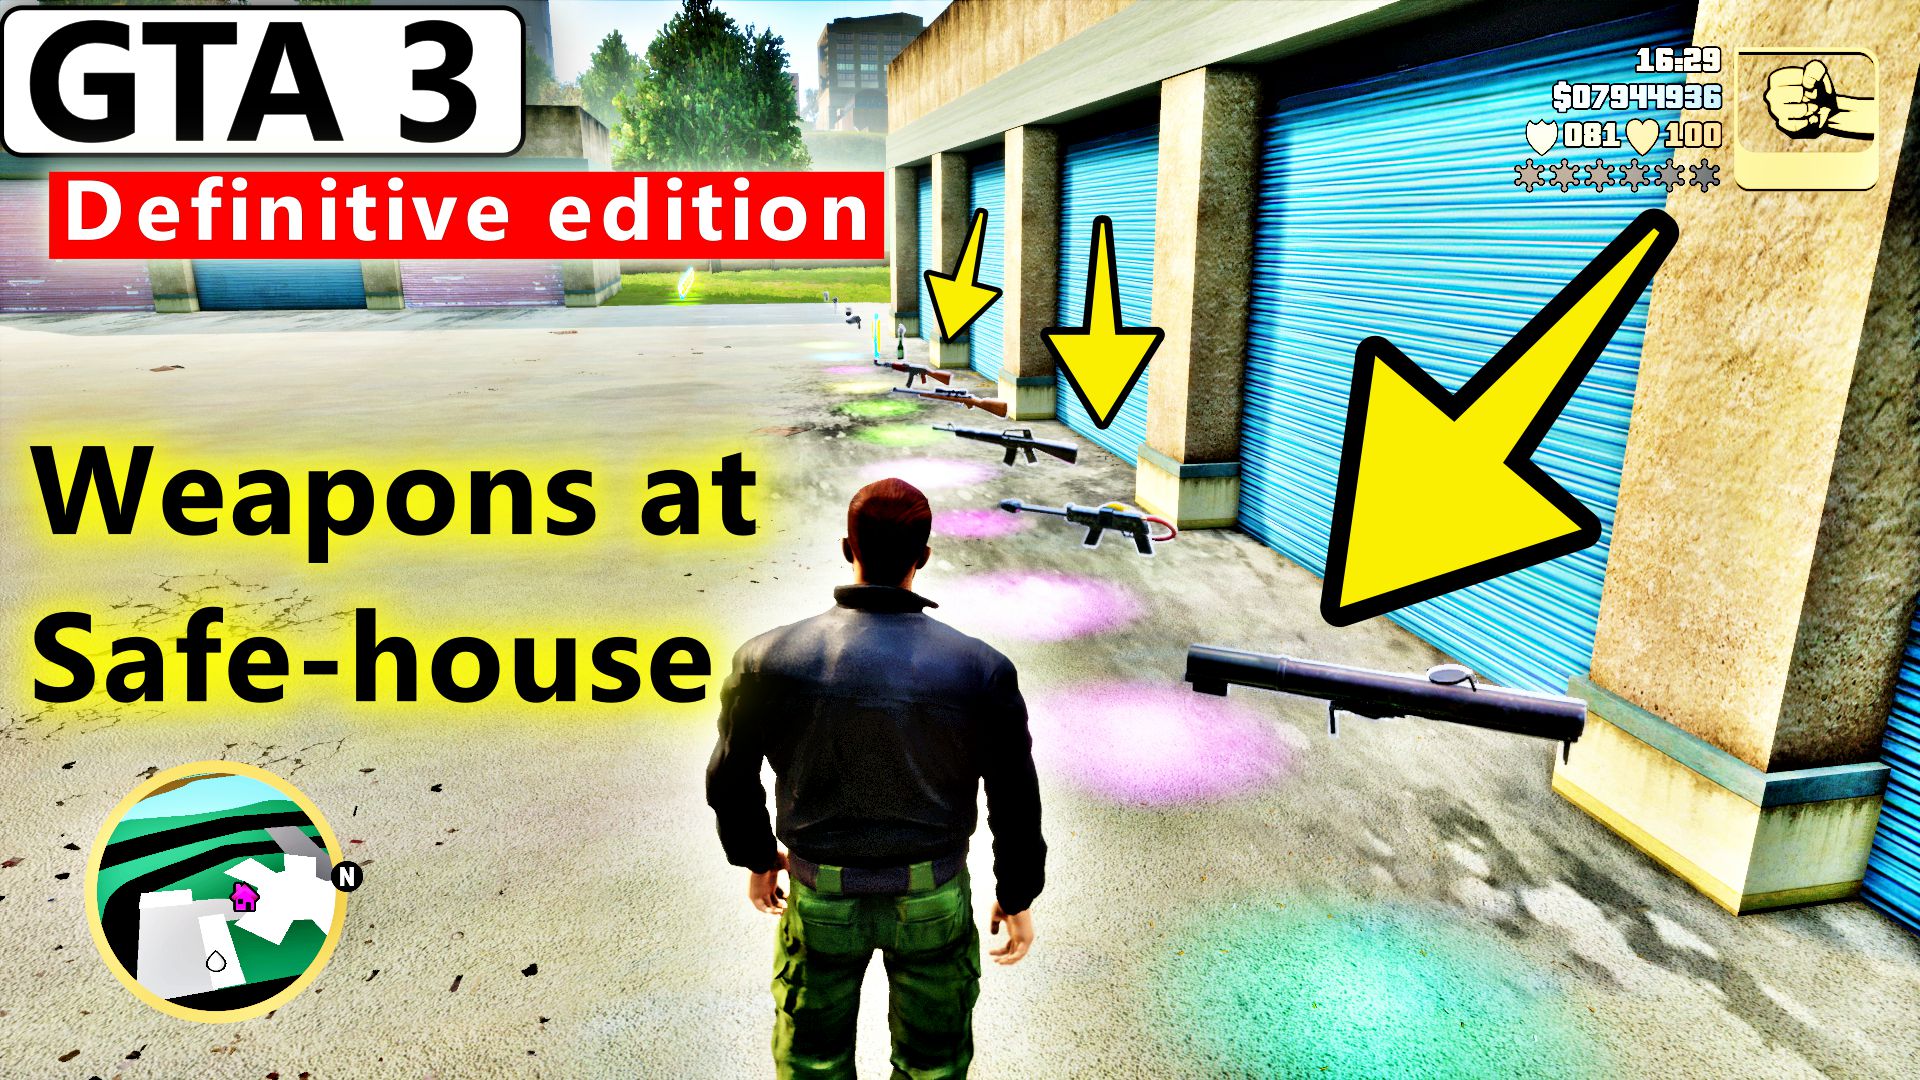 how to get weapons at safehouse in GTA 3 definitive edition